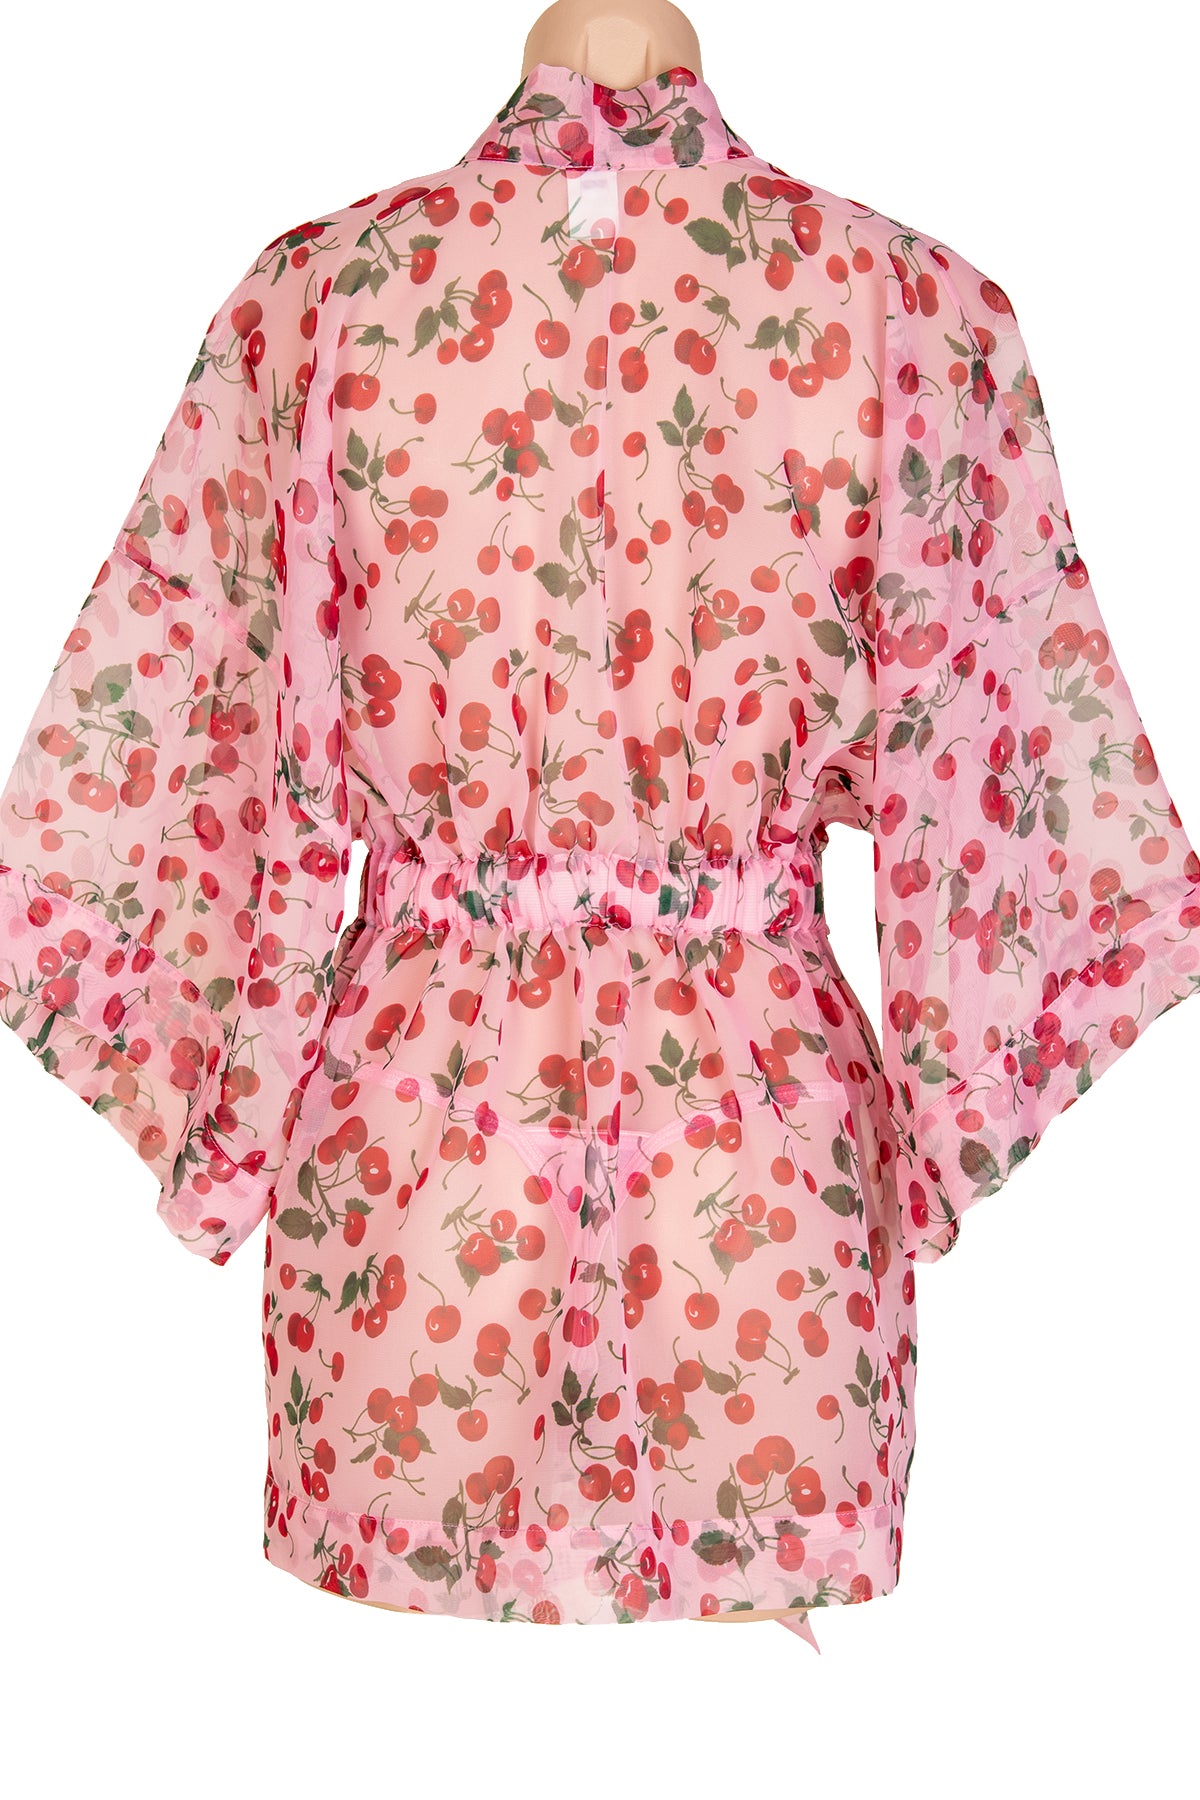 Soma Cool Nights Kimono Short Robe, Pink, size S/M | CoolSprings Galleria